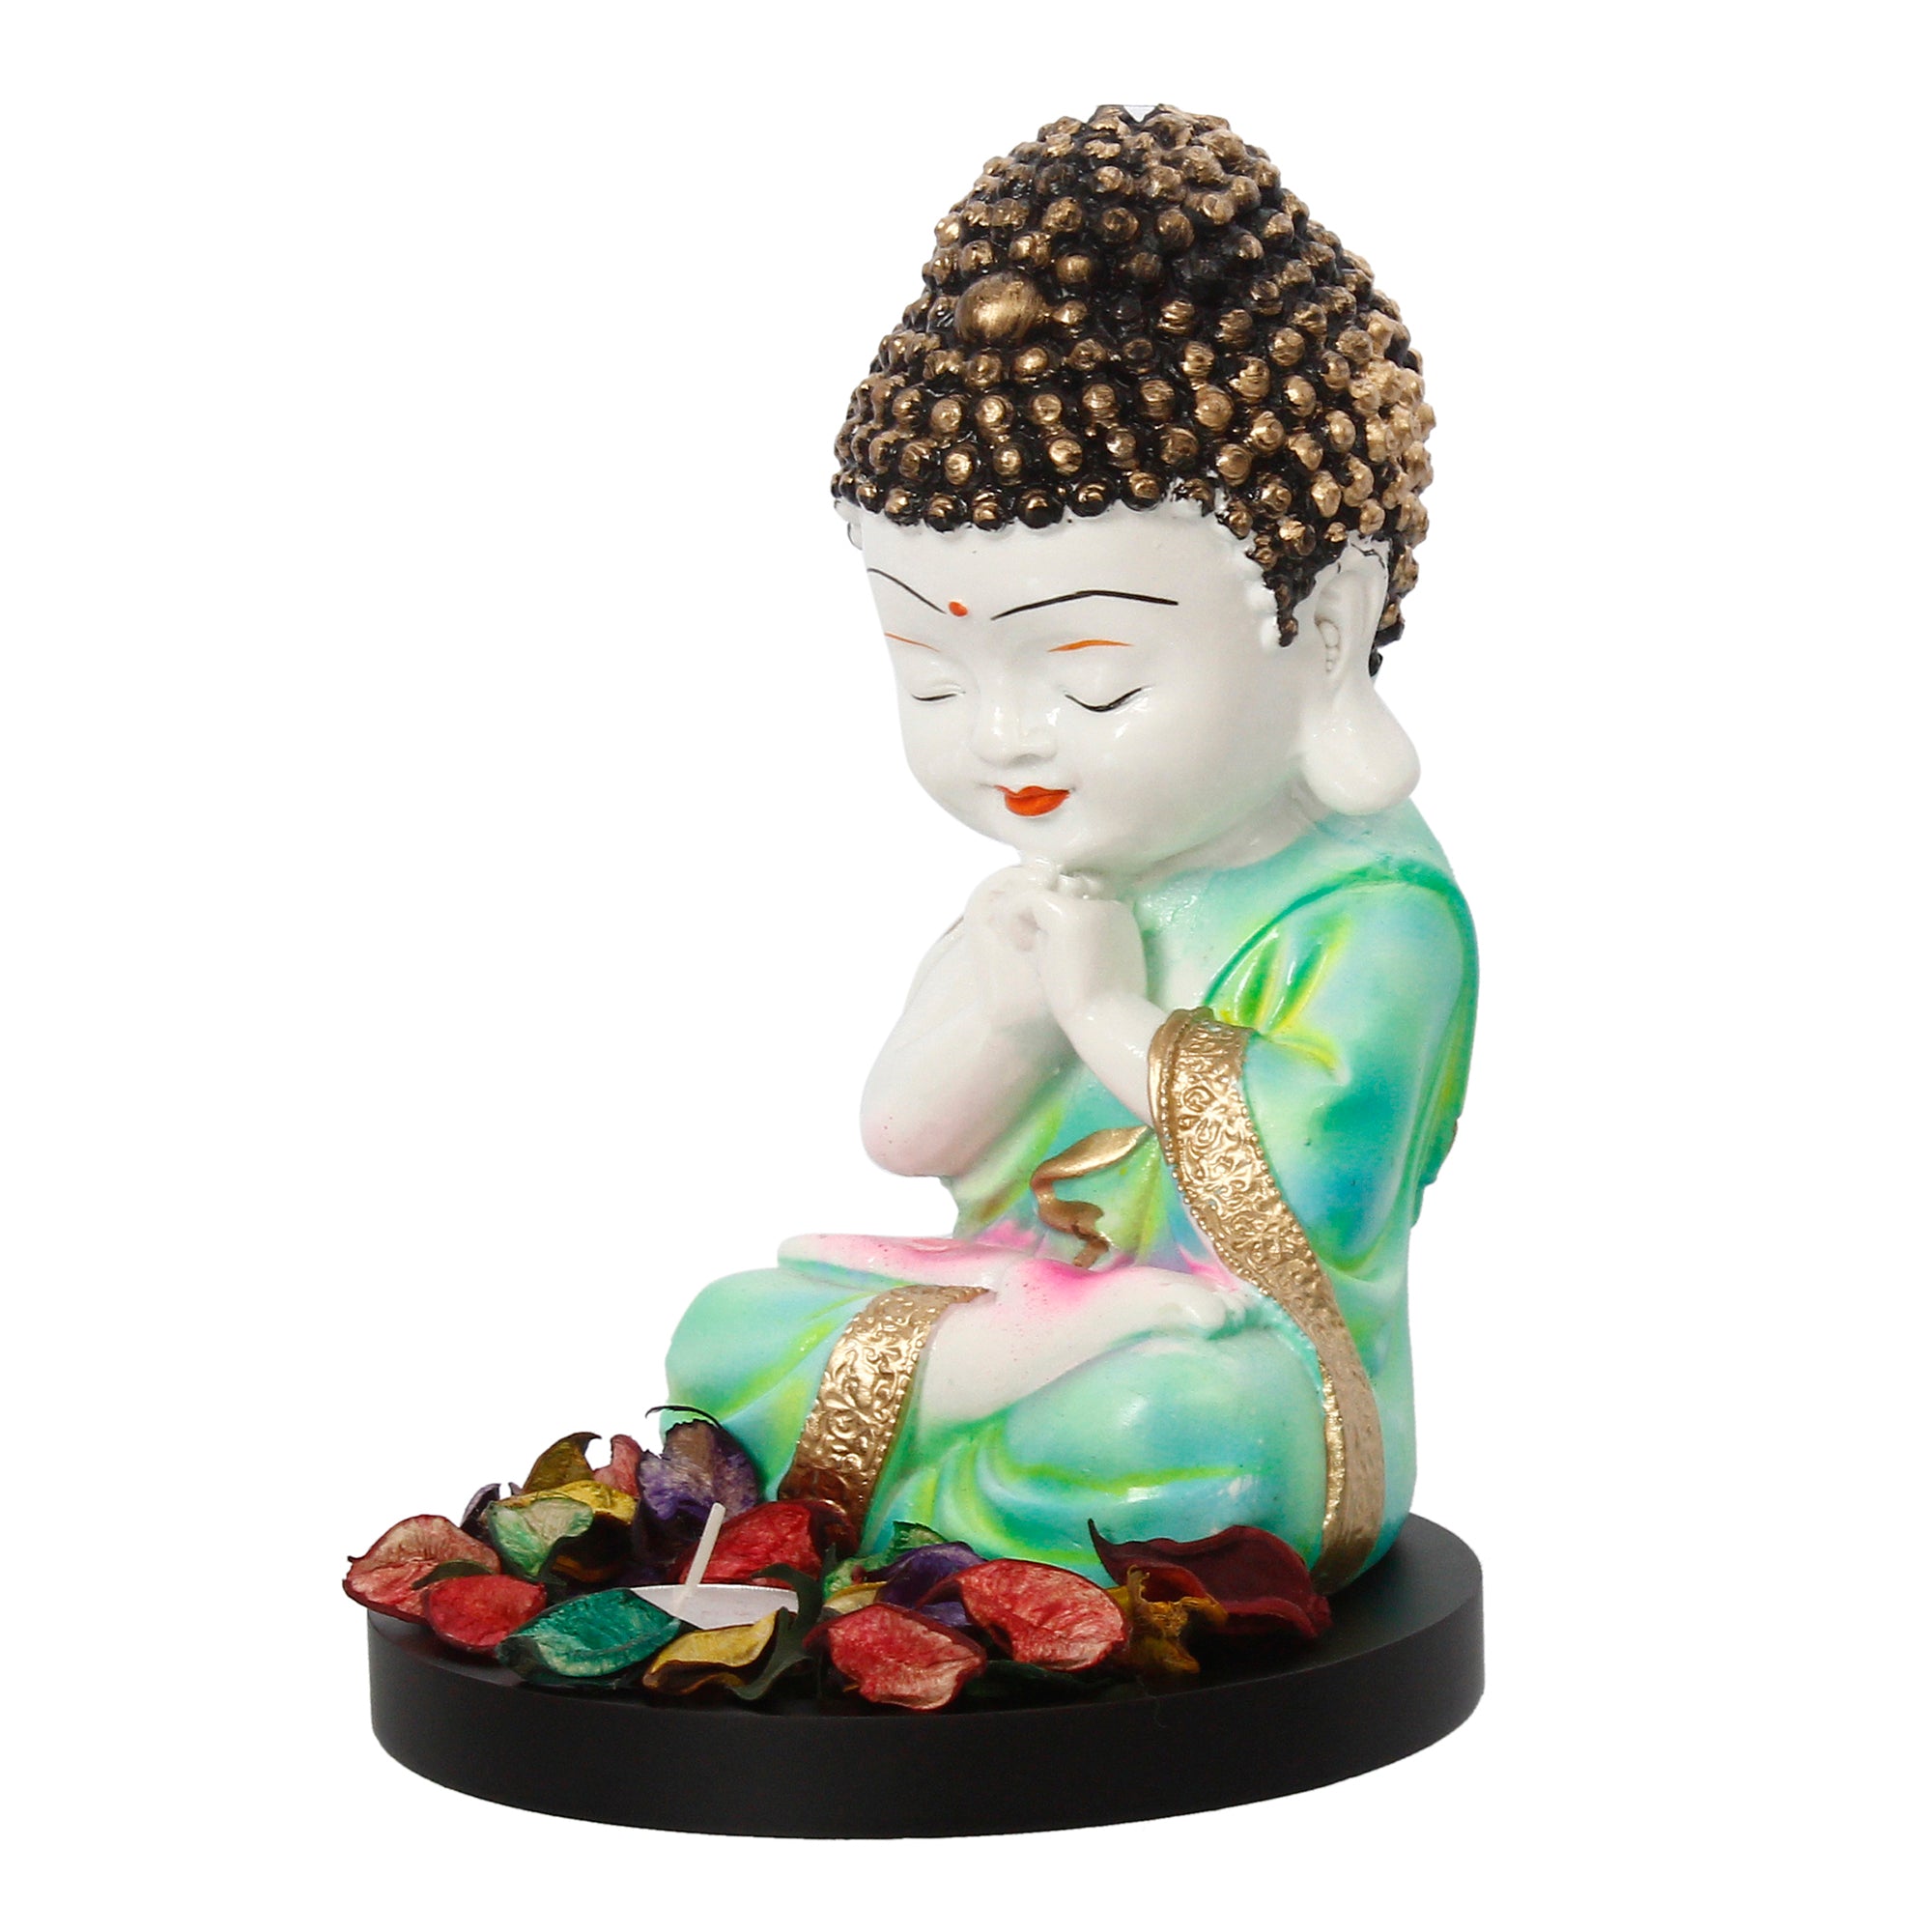 Polyresin Green and White Praying Monk Buddha Statue with Wooden Base, Fragranced Petals and Tealight 5